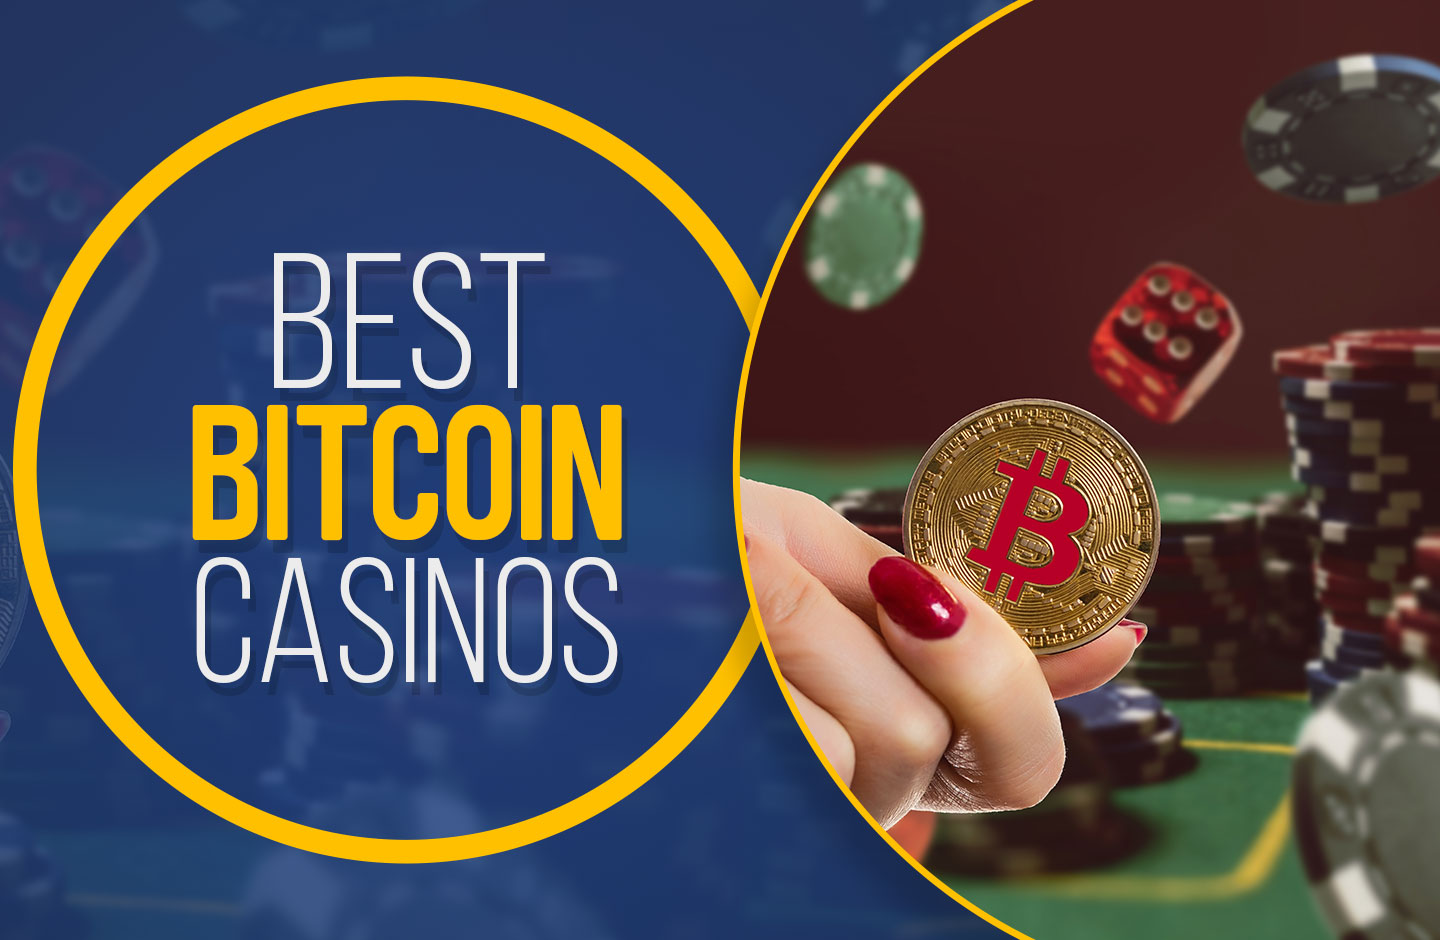 Exploring the Culture of online crypto casinos